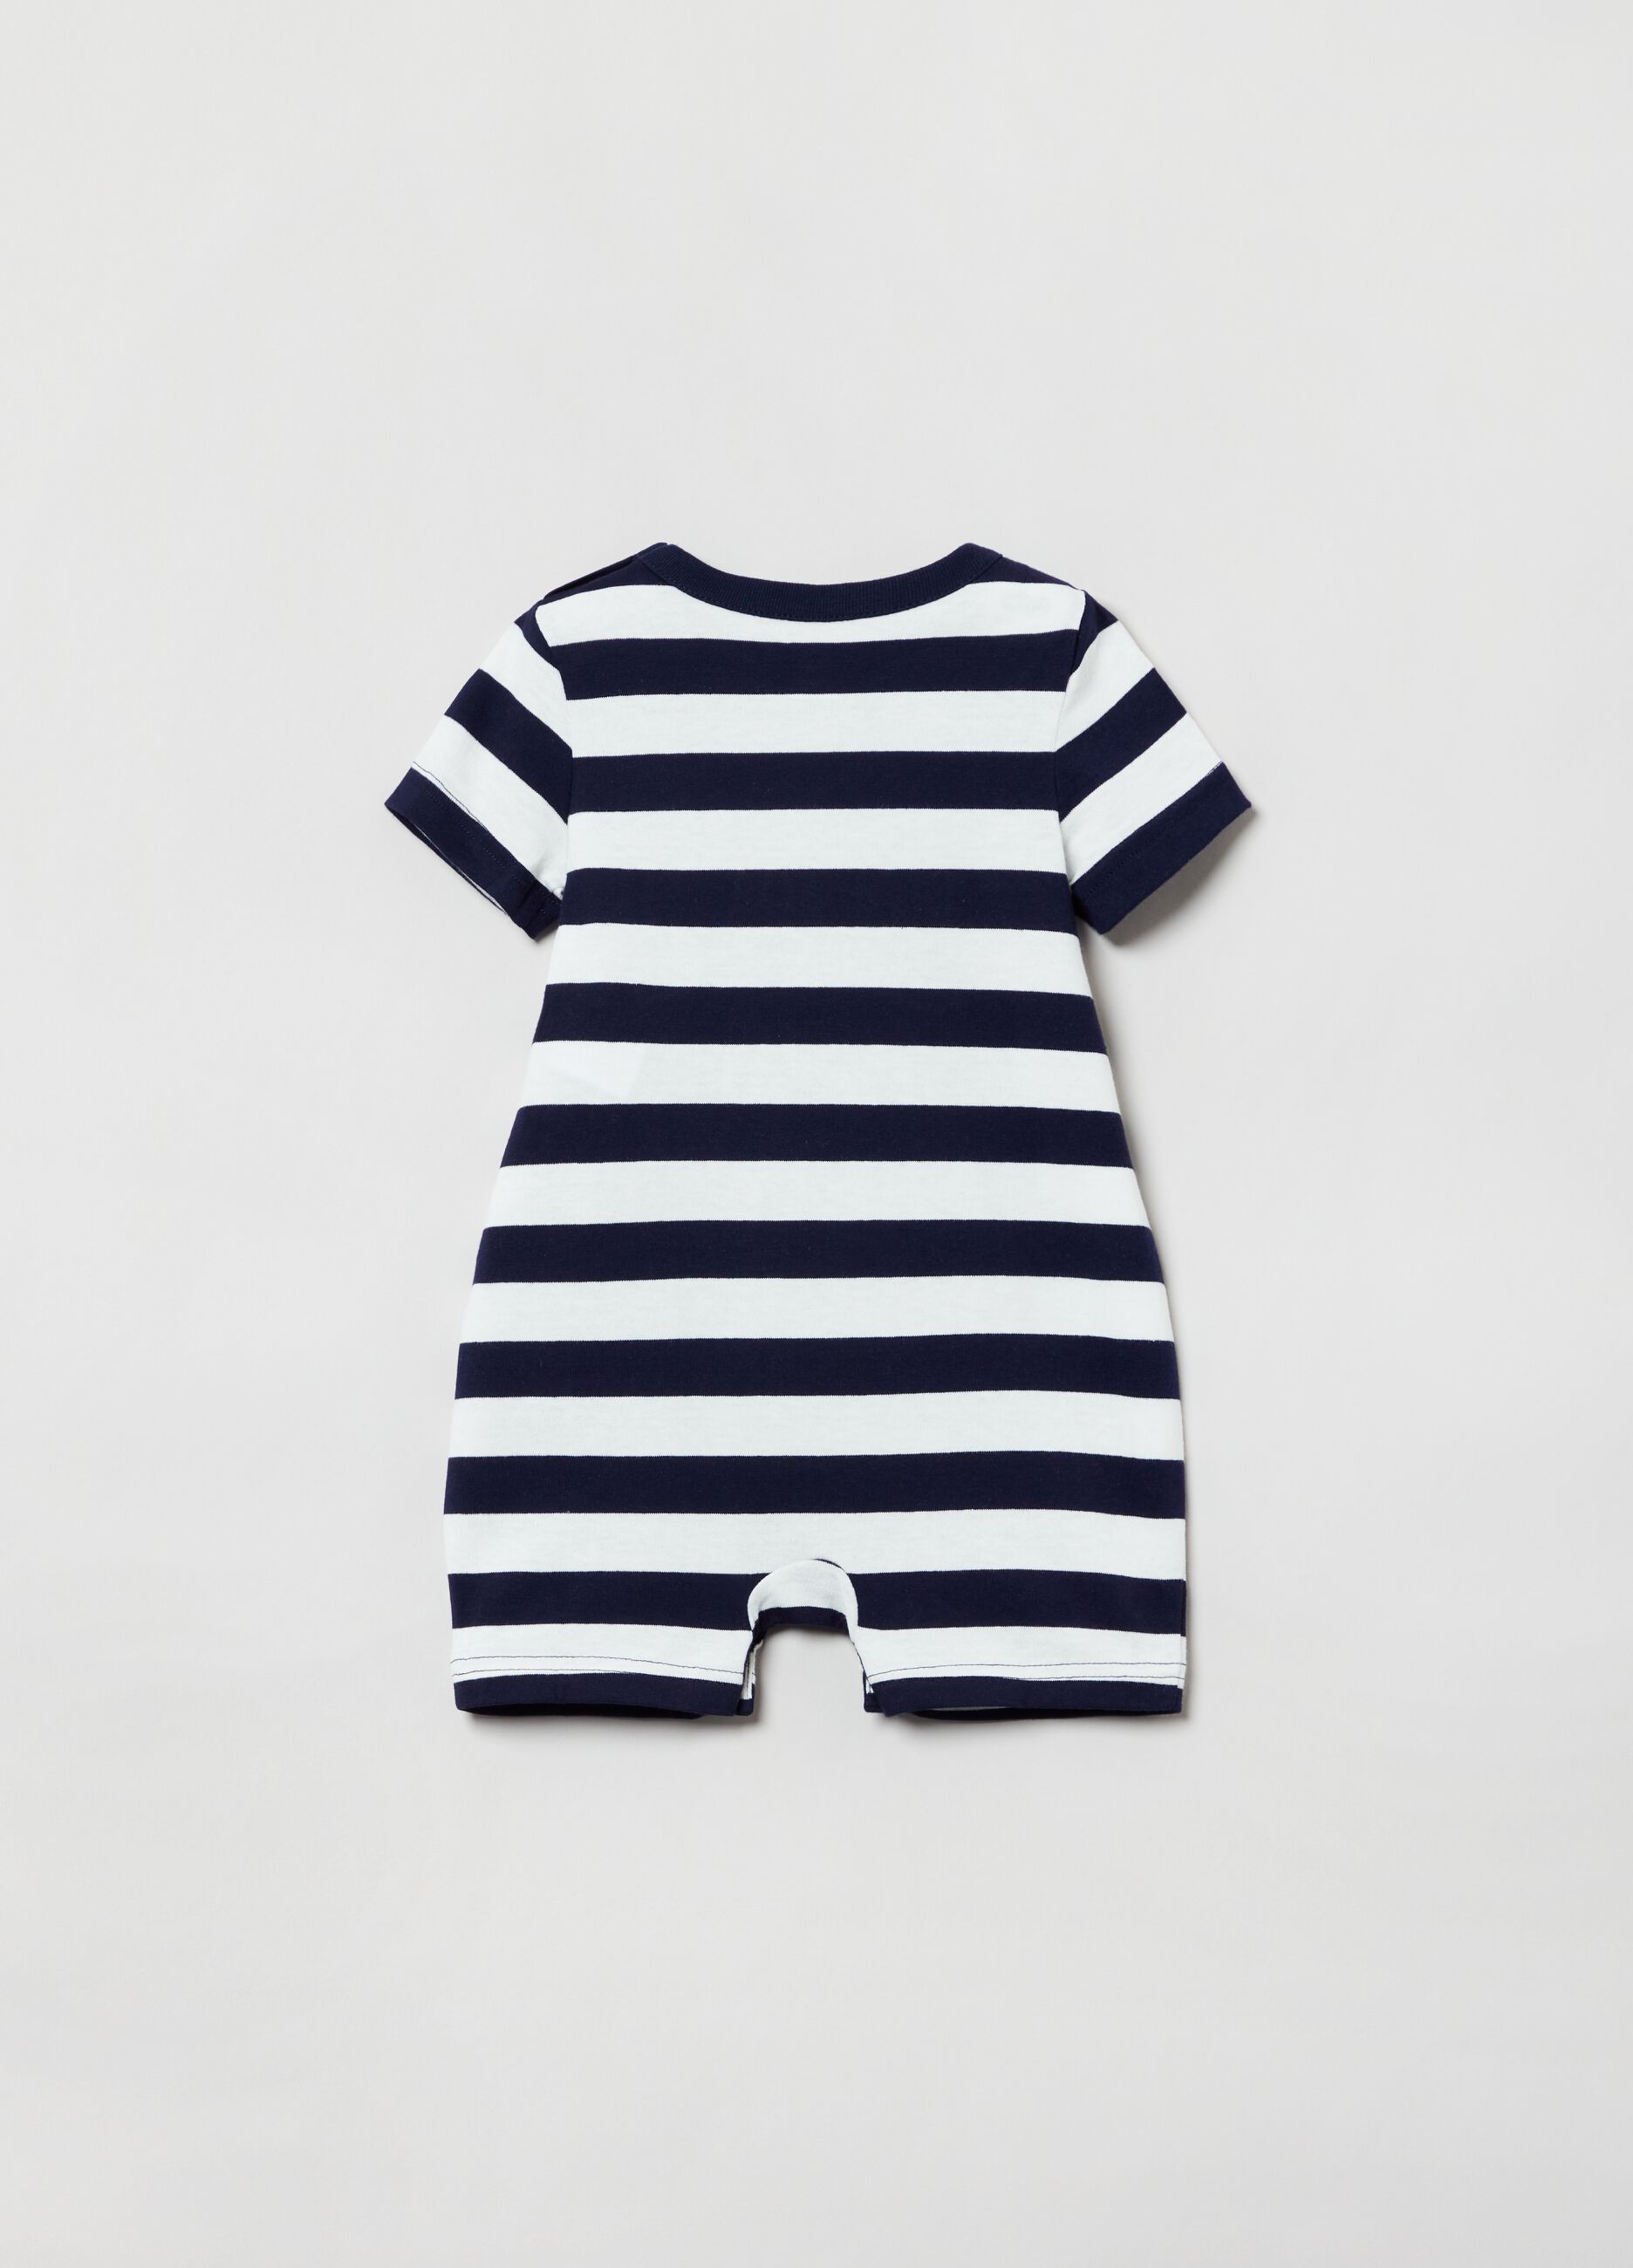 Striped romper suit with logo embroidery